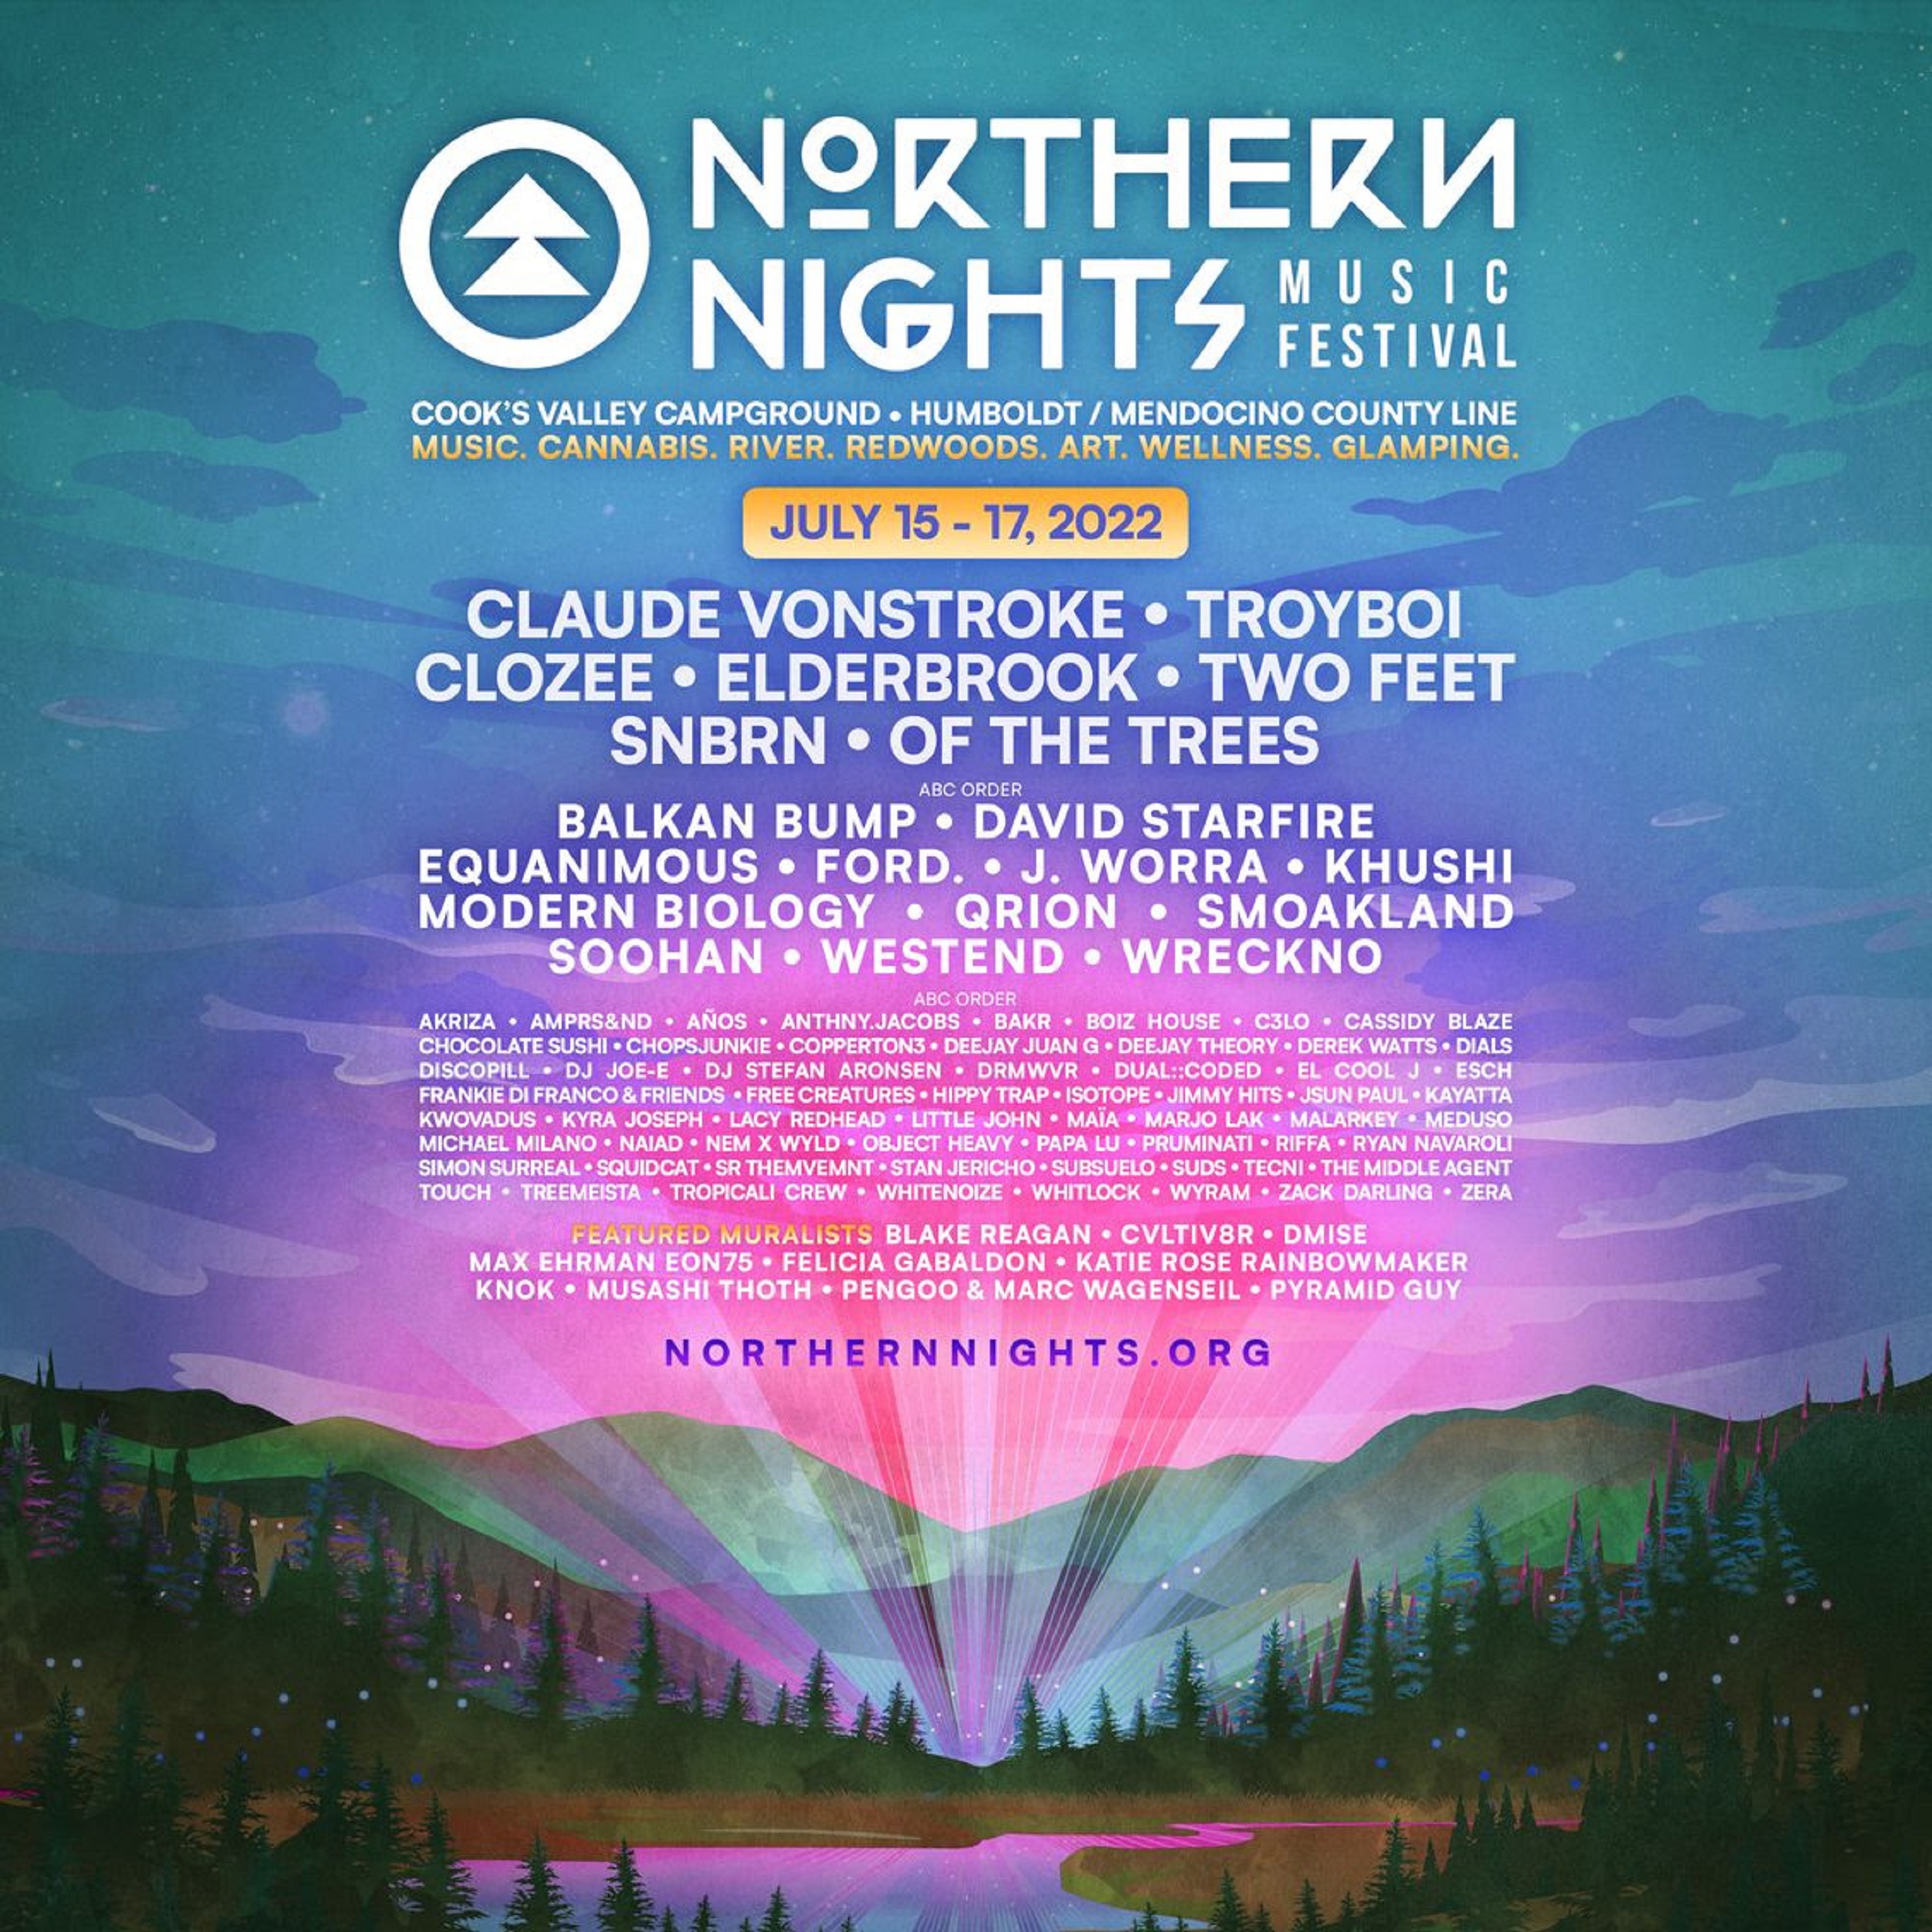 Northern Nights Music Festival Announces Phase Two Music Lineup for